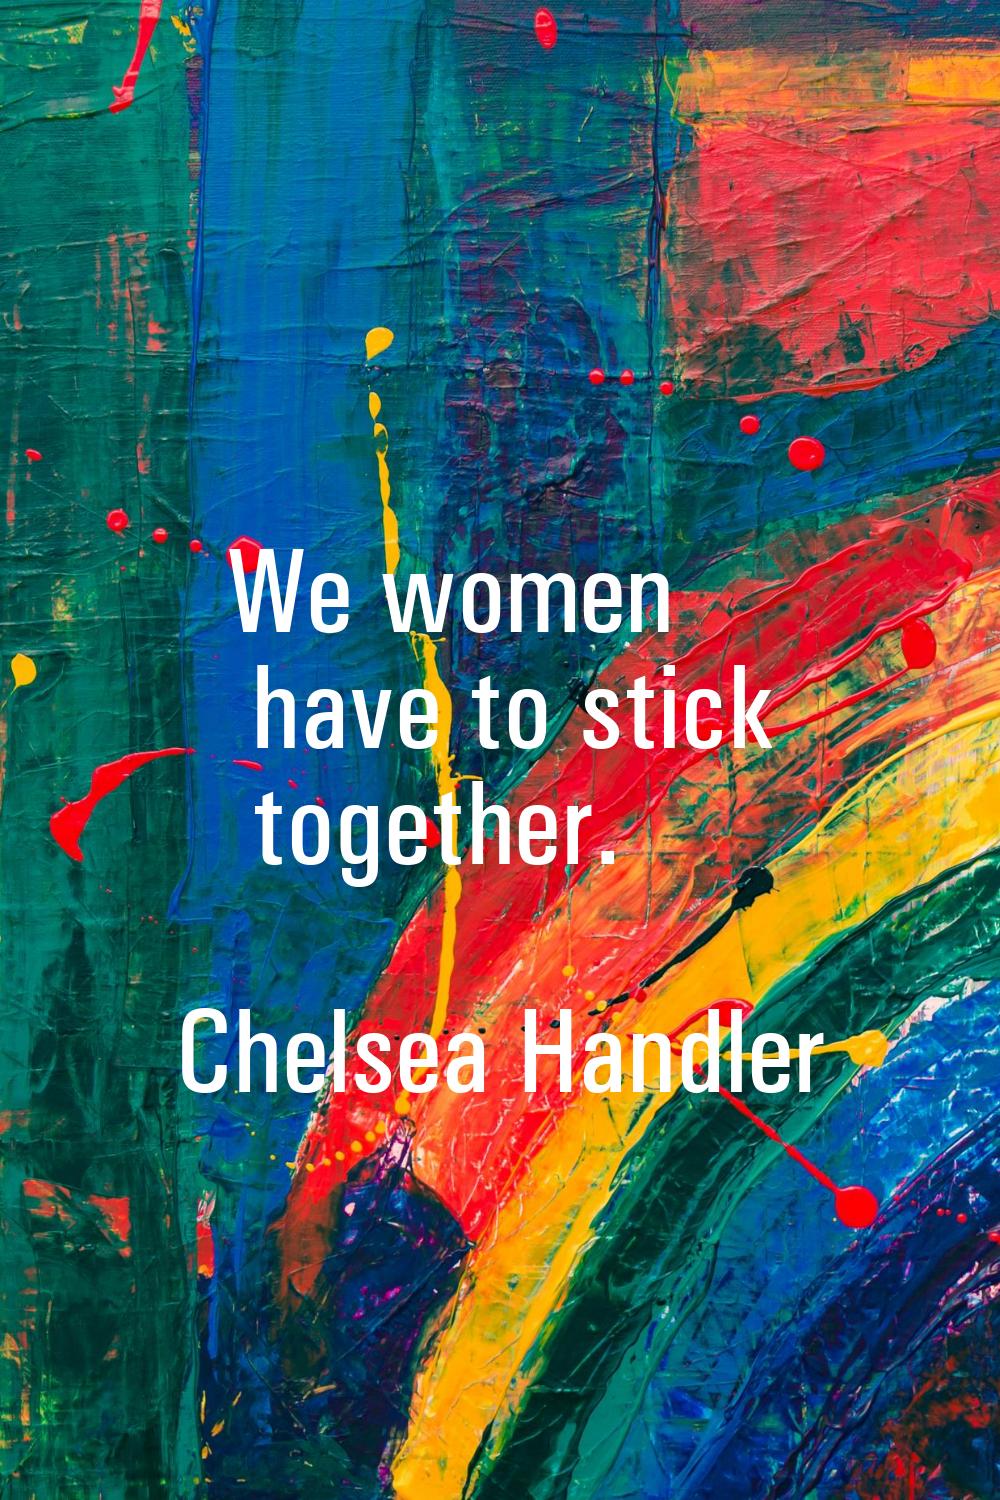 We women have to stick together.